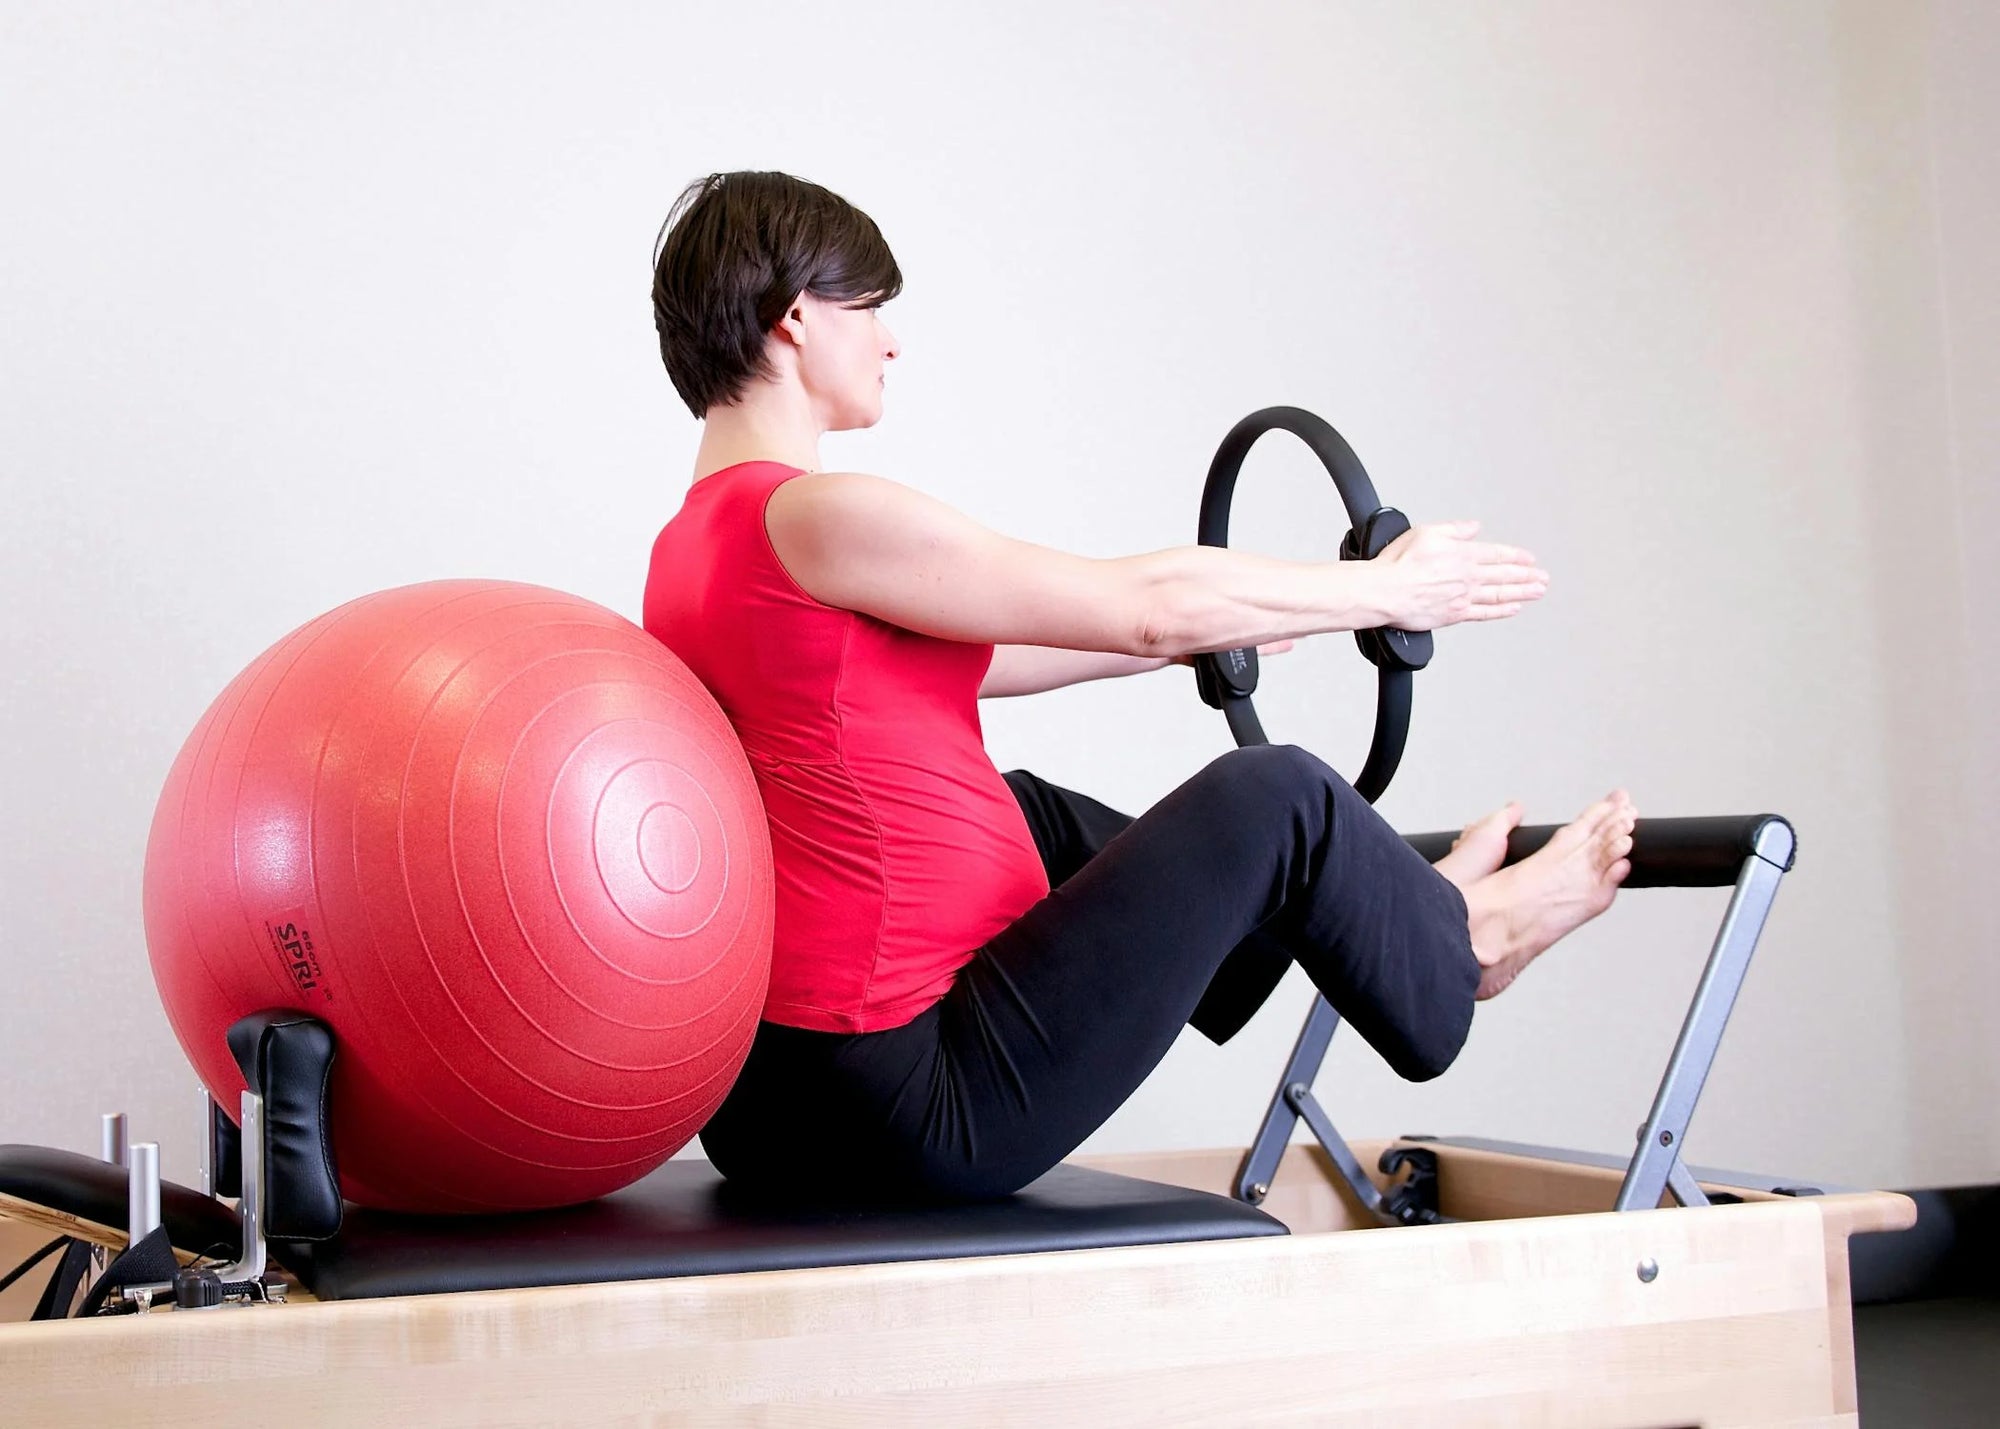 Which exercise is best for back pain during pregnancy?